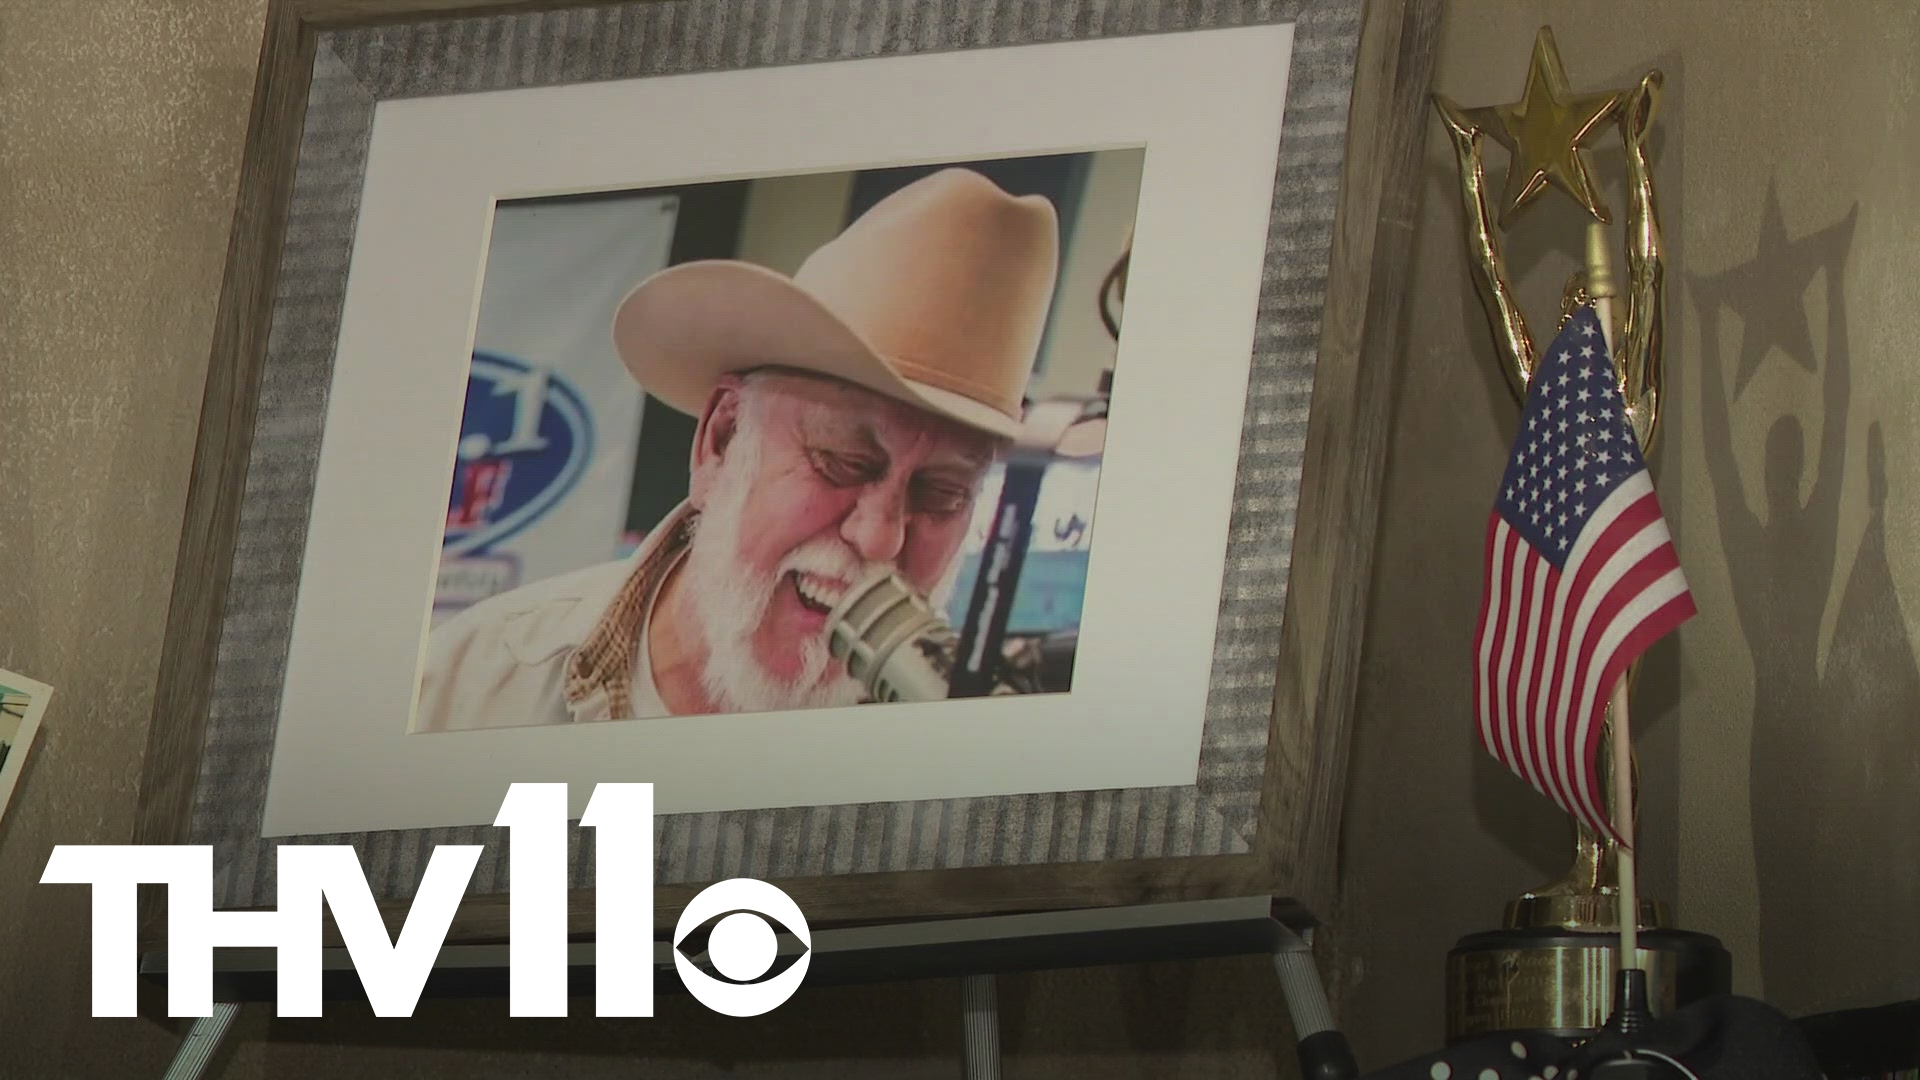 Family, friends and longtime fans of Arkansas radio legend Bob Robbins can now check out his newly unveiled exhibit. Here’s a sneak peek of what to expect.